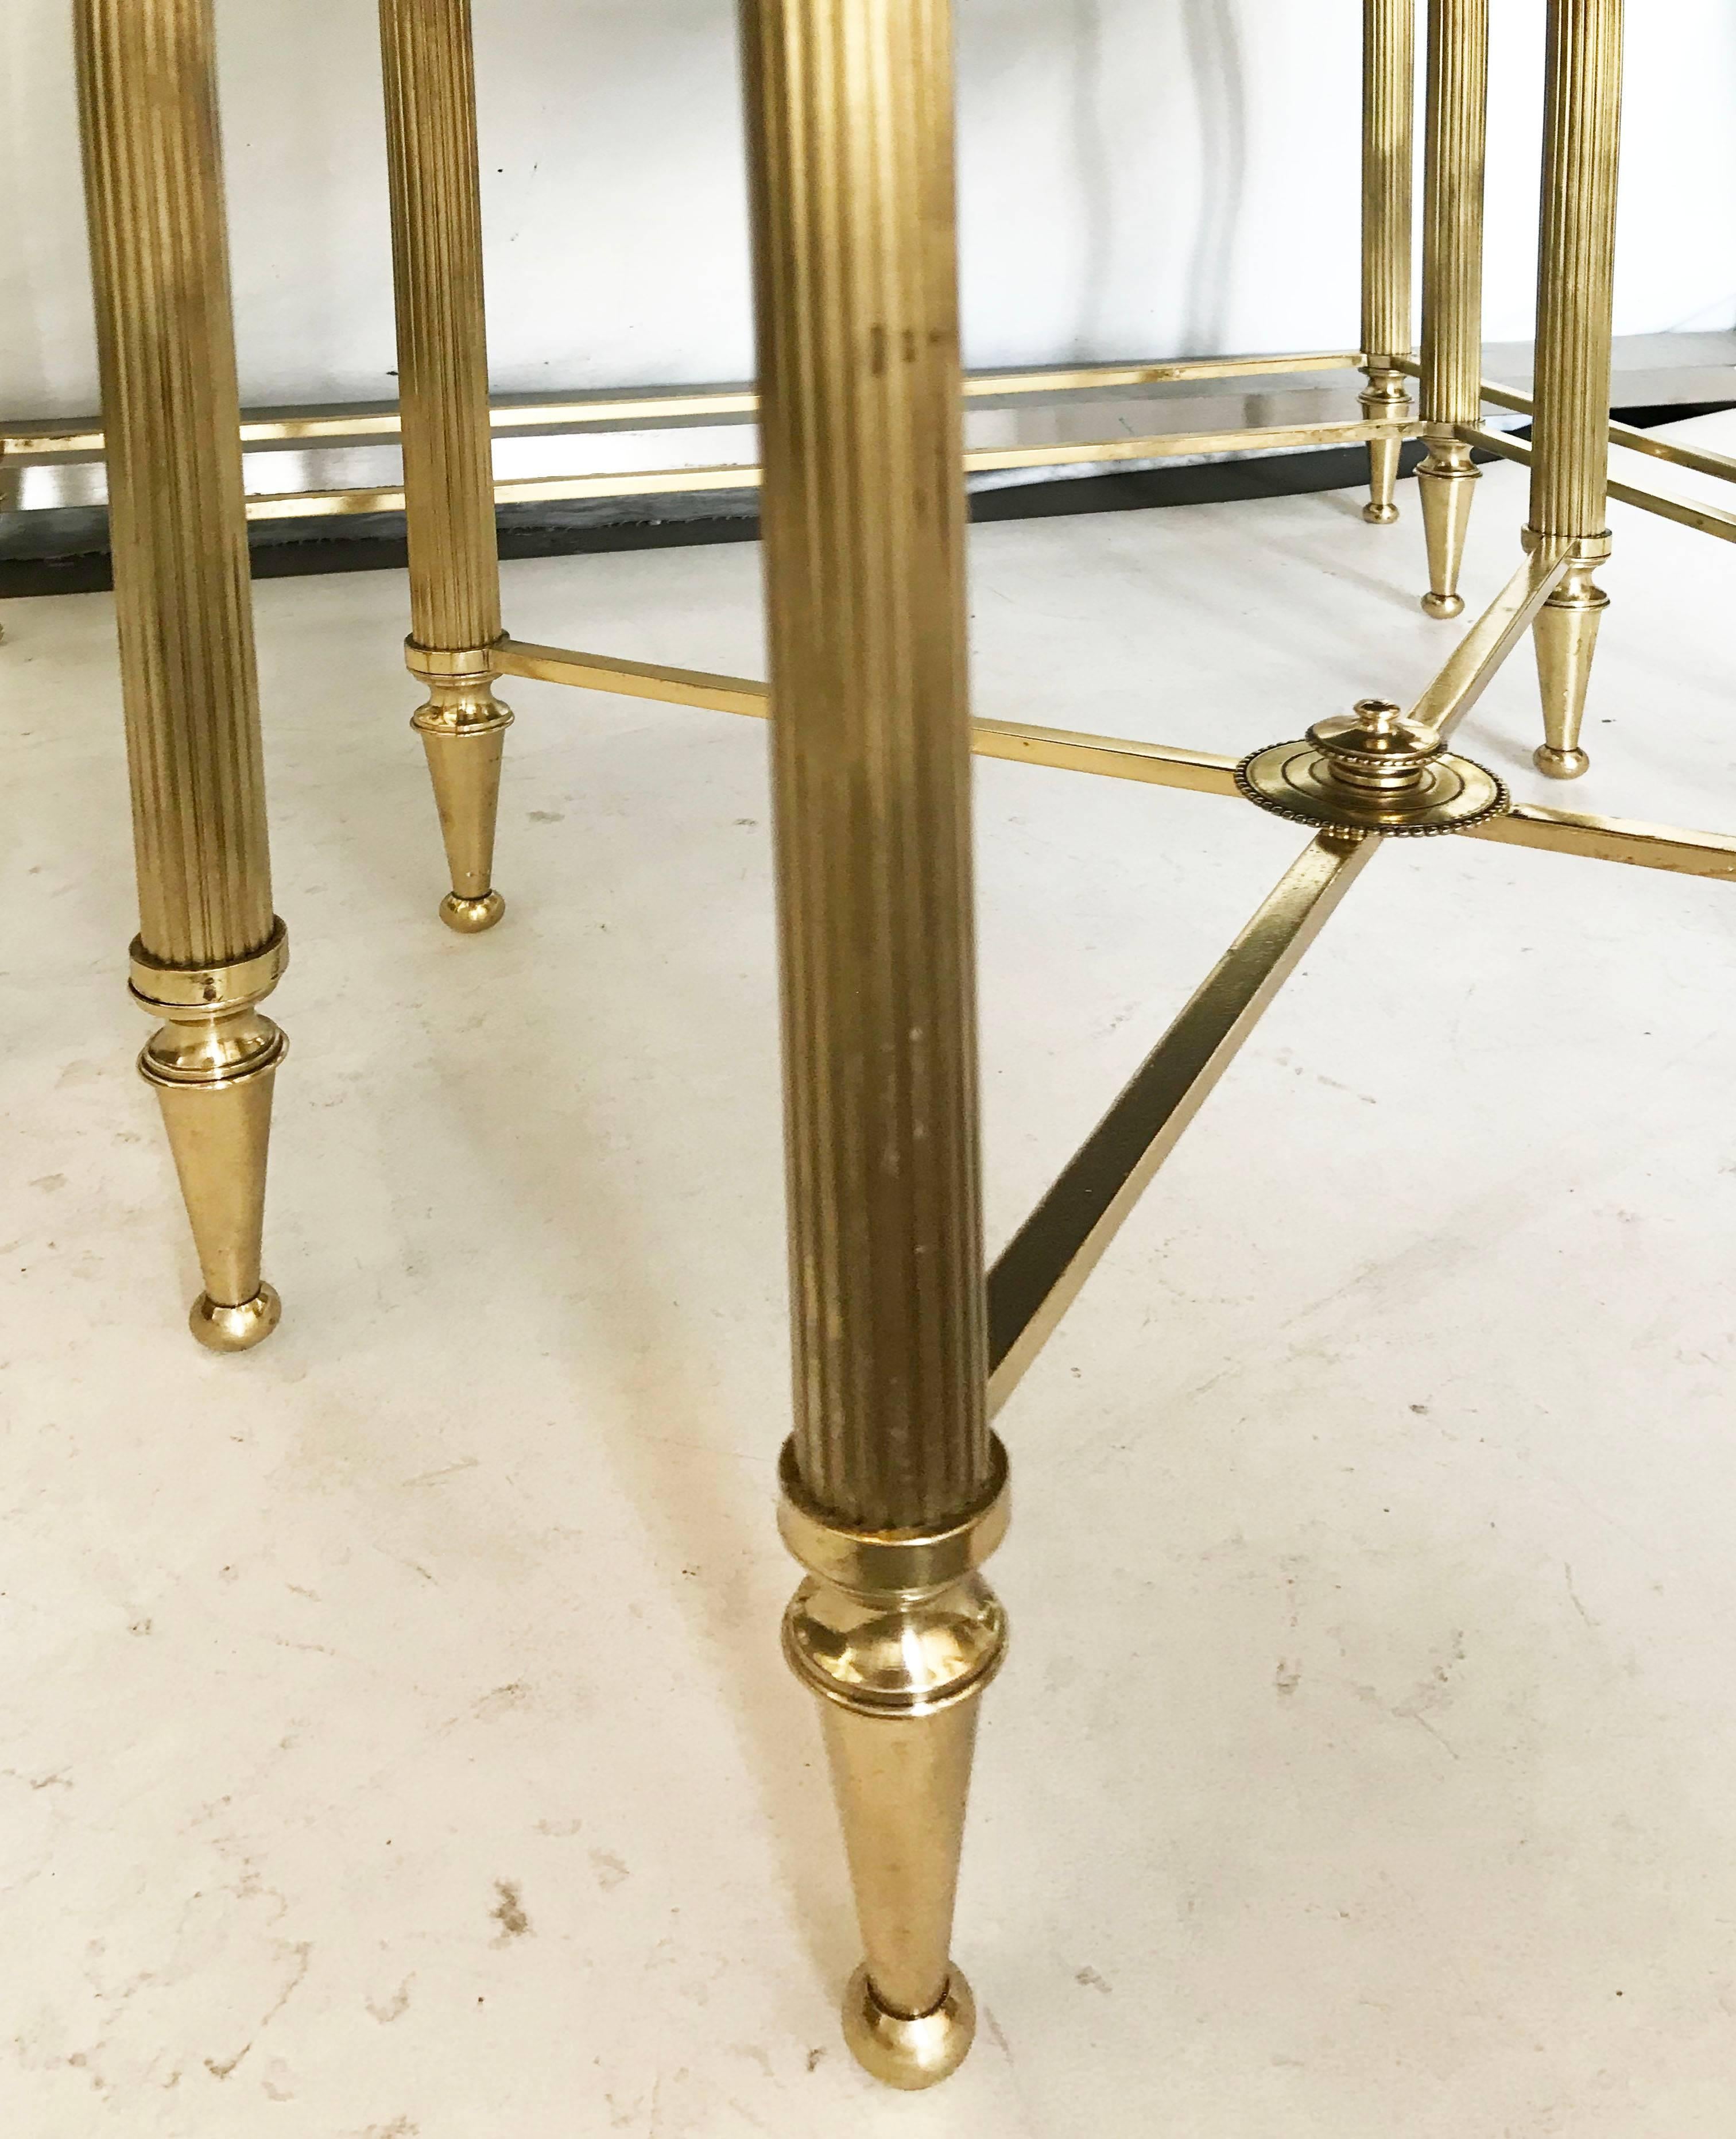 Set of 3 Maison Lancel Nesting Tables Brass Wood Top French Mid-Century Modern For Sale 1